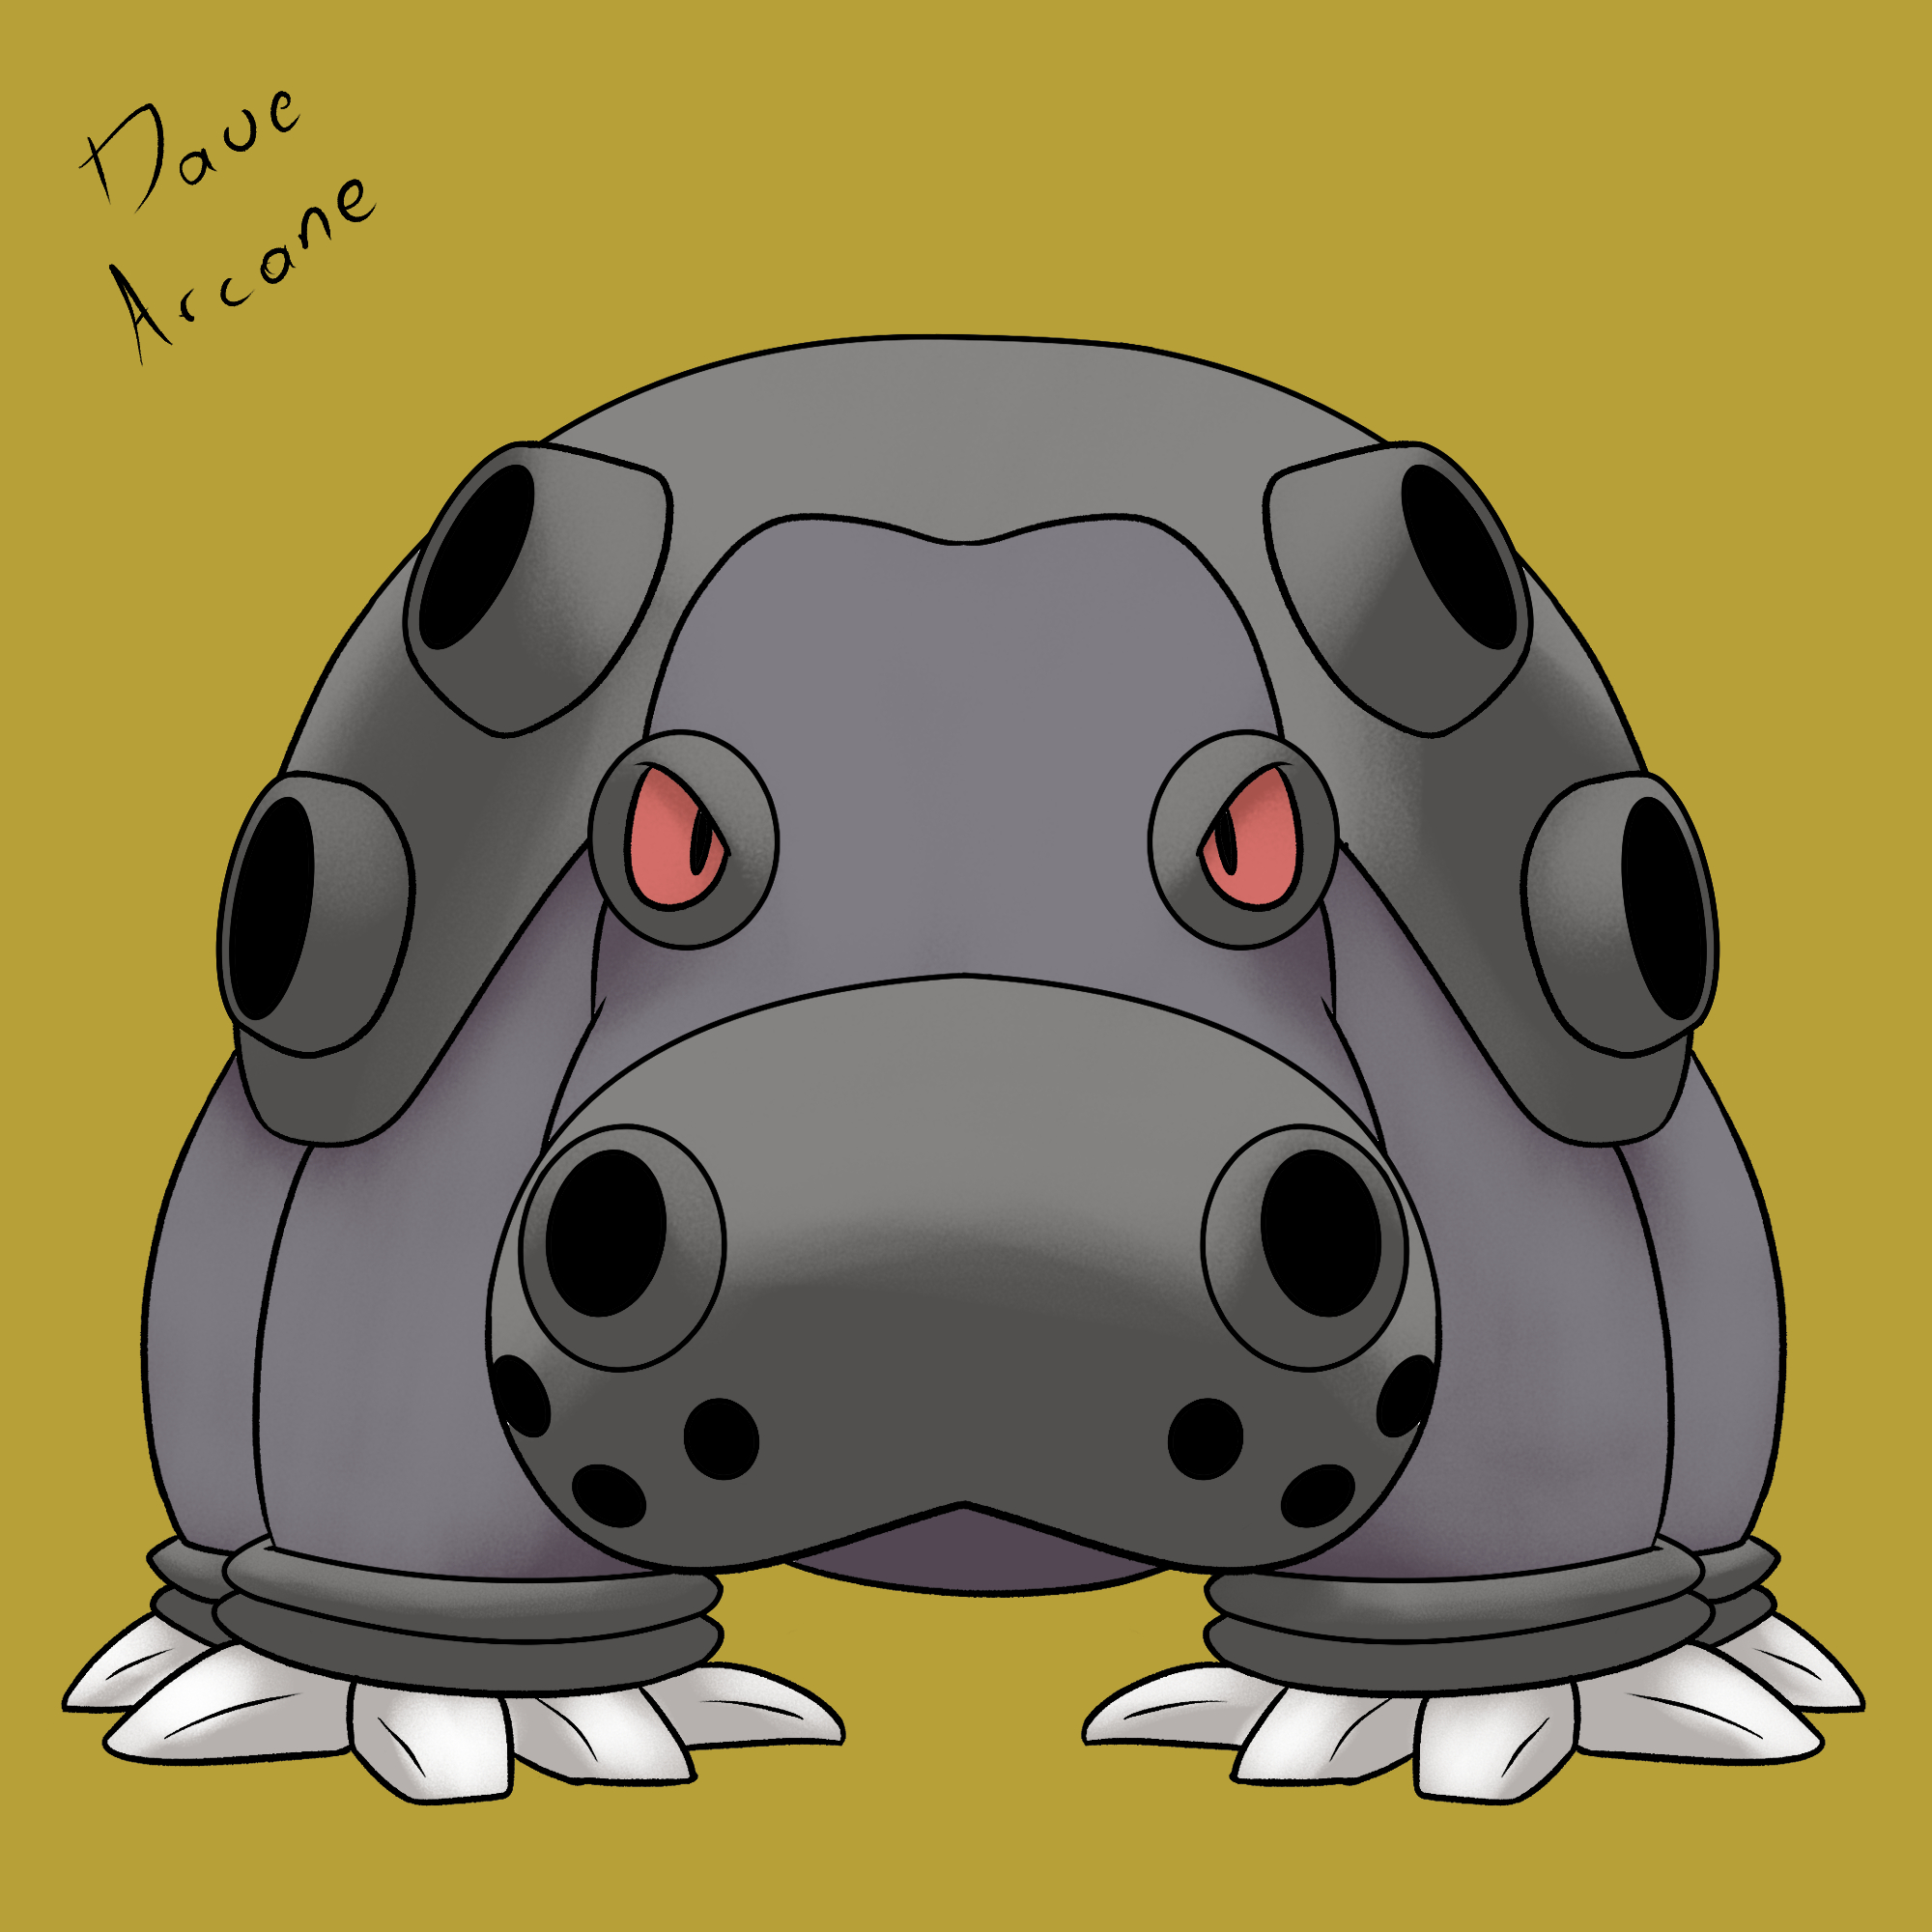 Dave Drawing 1 Pokemon Each Day Day 450 Of Drawing One Pokemon Per Day Females Are Cooler Follow Me To See The Upcoming Pokemon Drawings Pokemon Pokemonart Drawing Hippowdon Anime